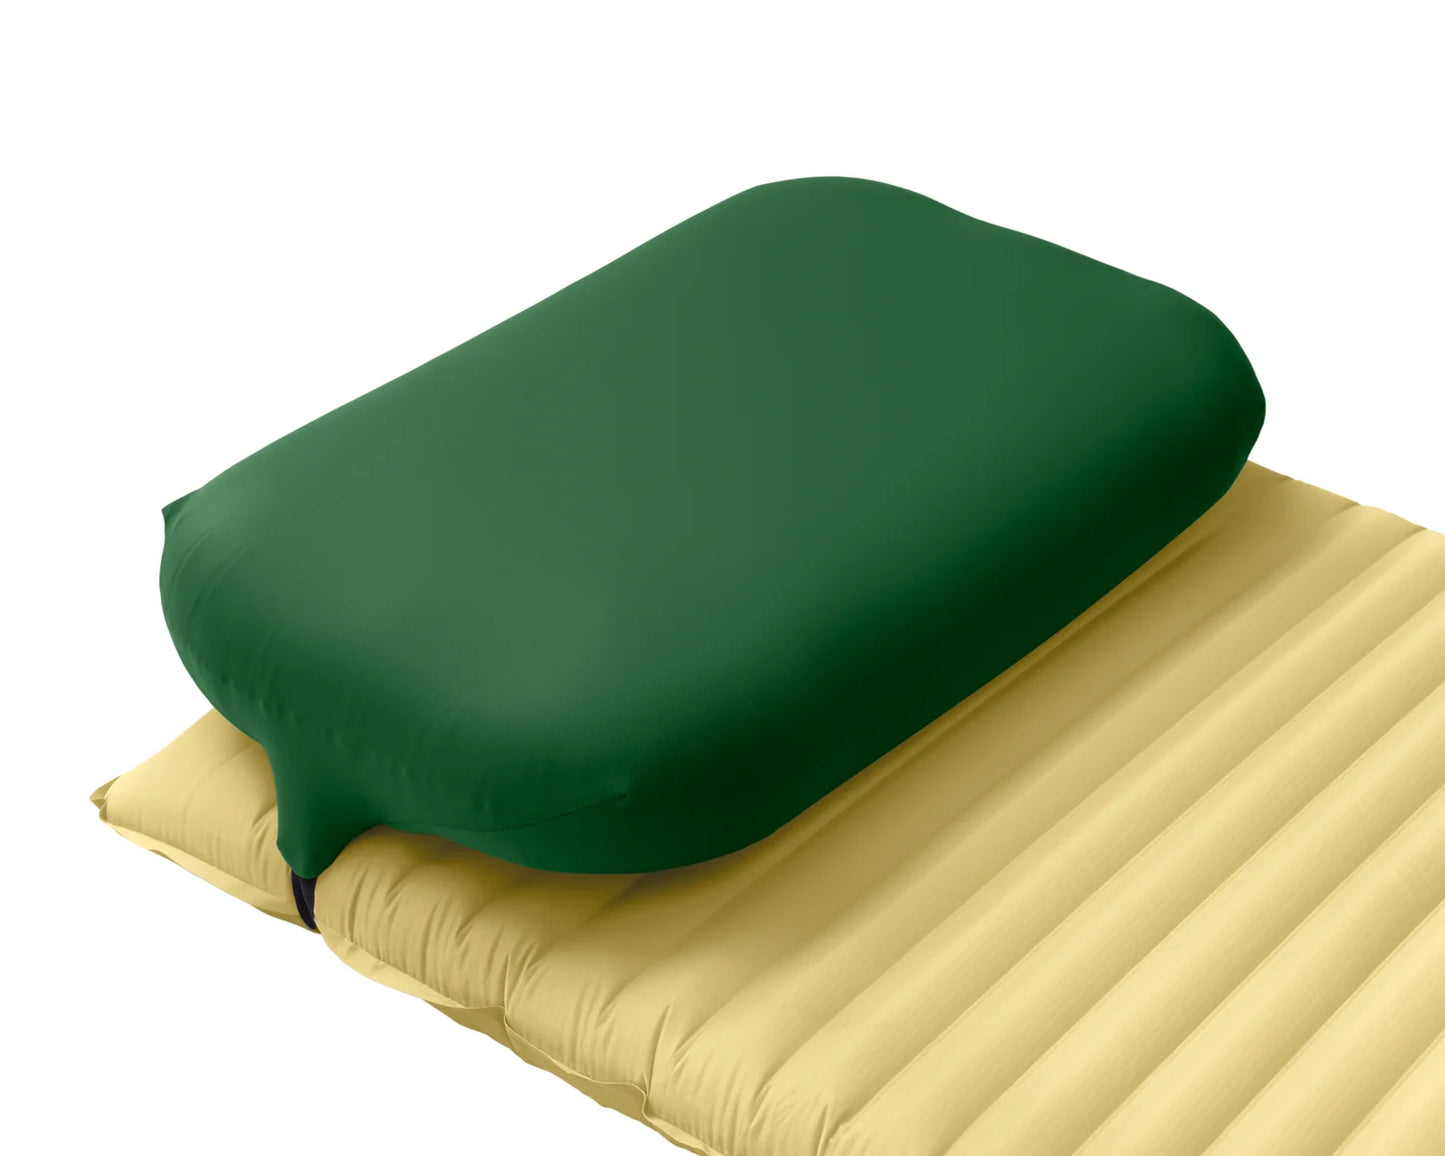 Pillow Strap large in green side view. Backpacking pillowcase for attaching to a sleeping pad for better sleep camping.